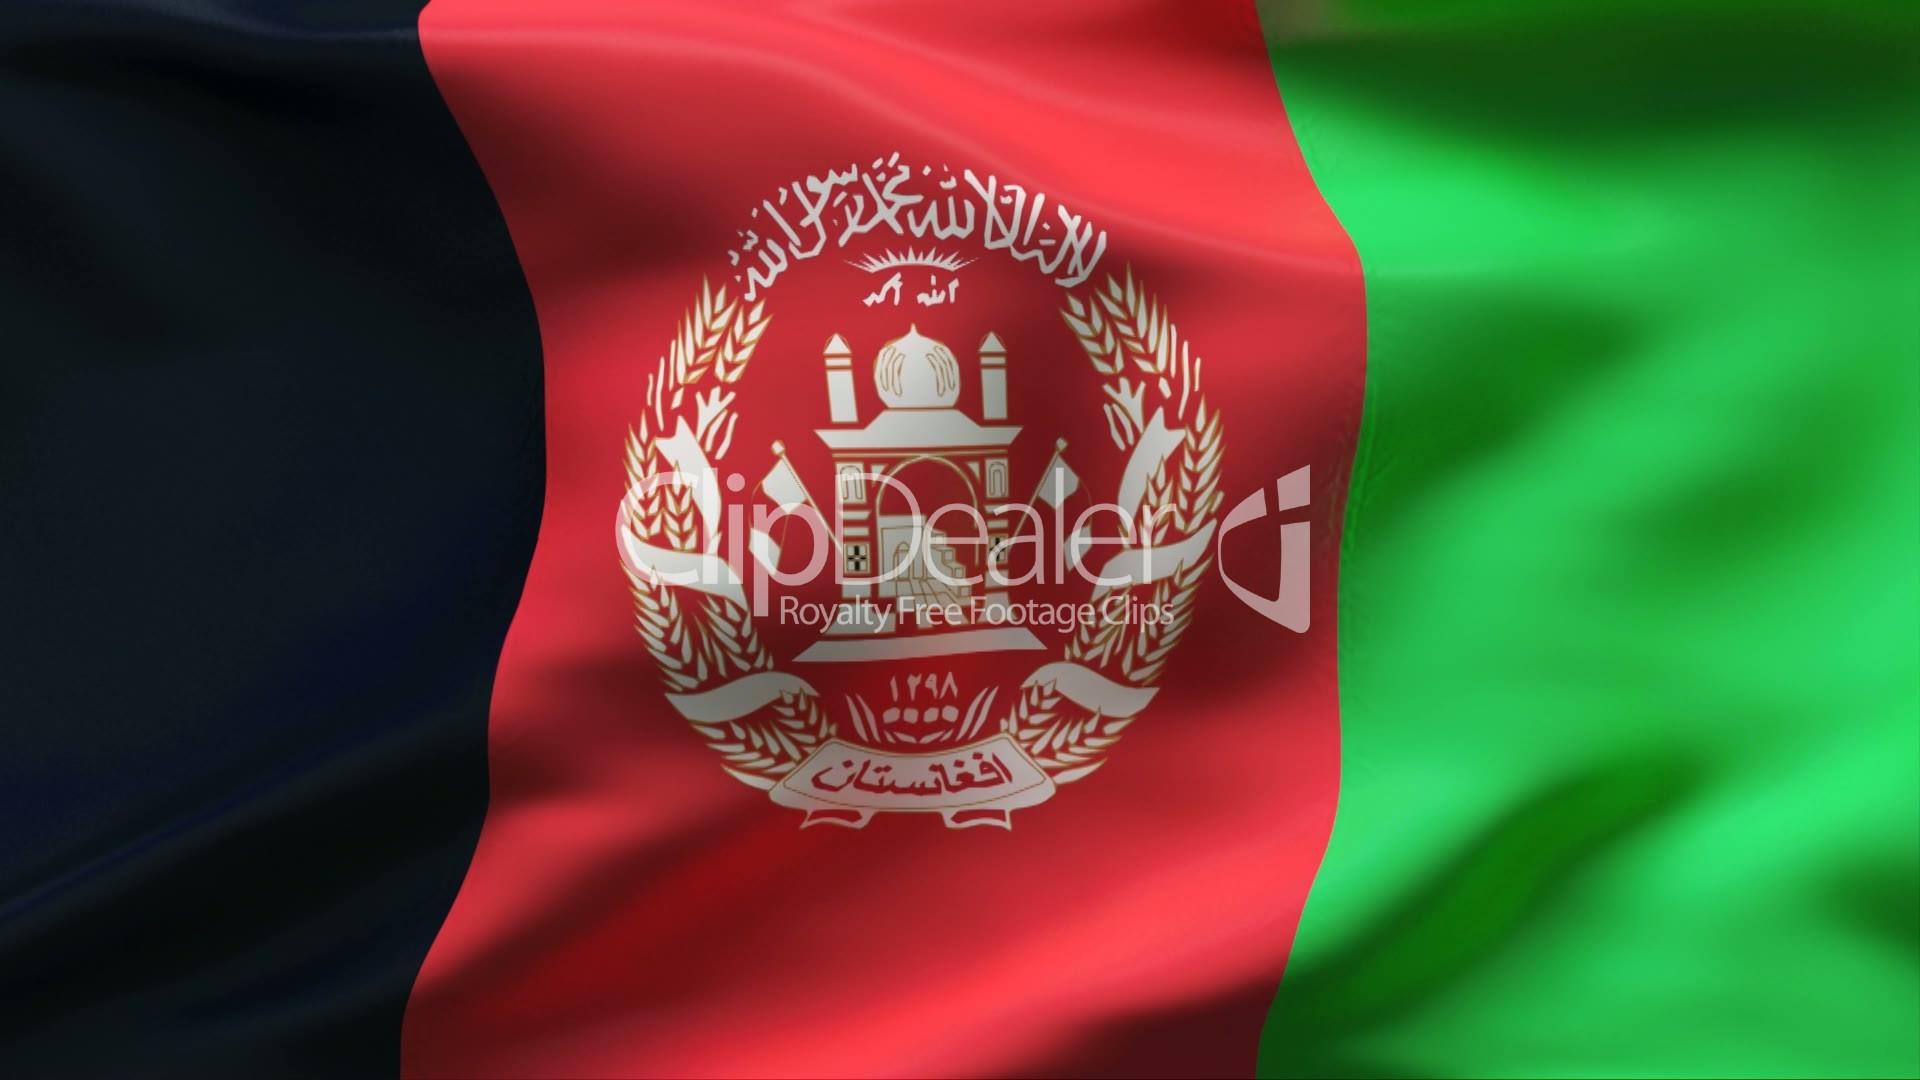 Afghanistan Flag Wallpapers Wallpaper Cave